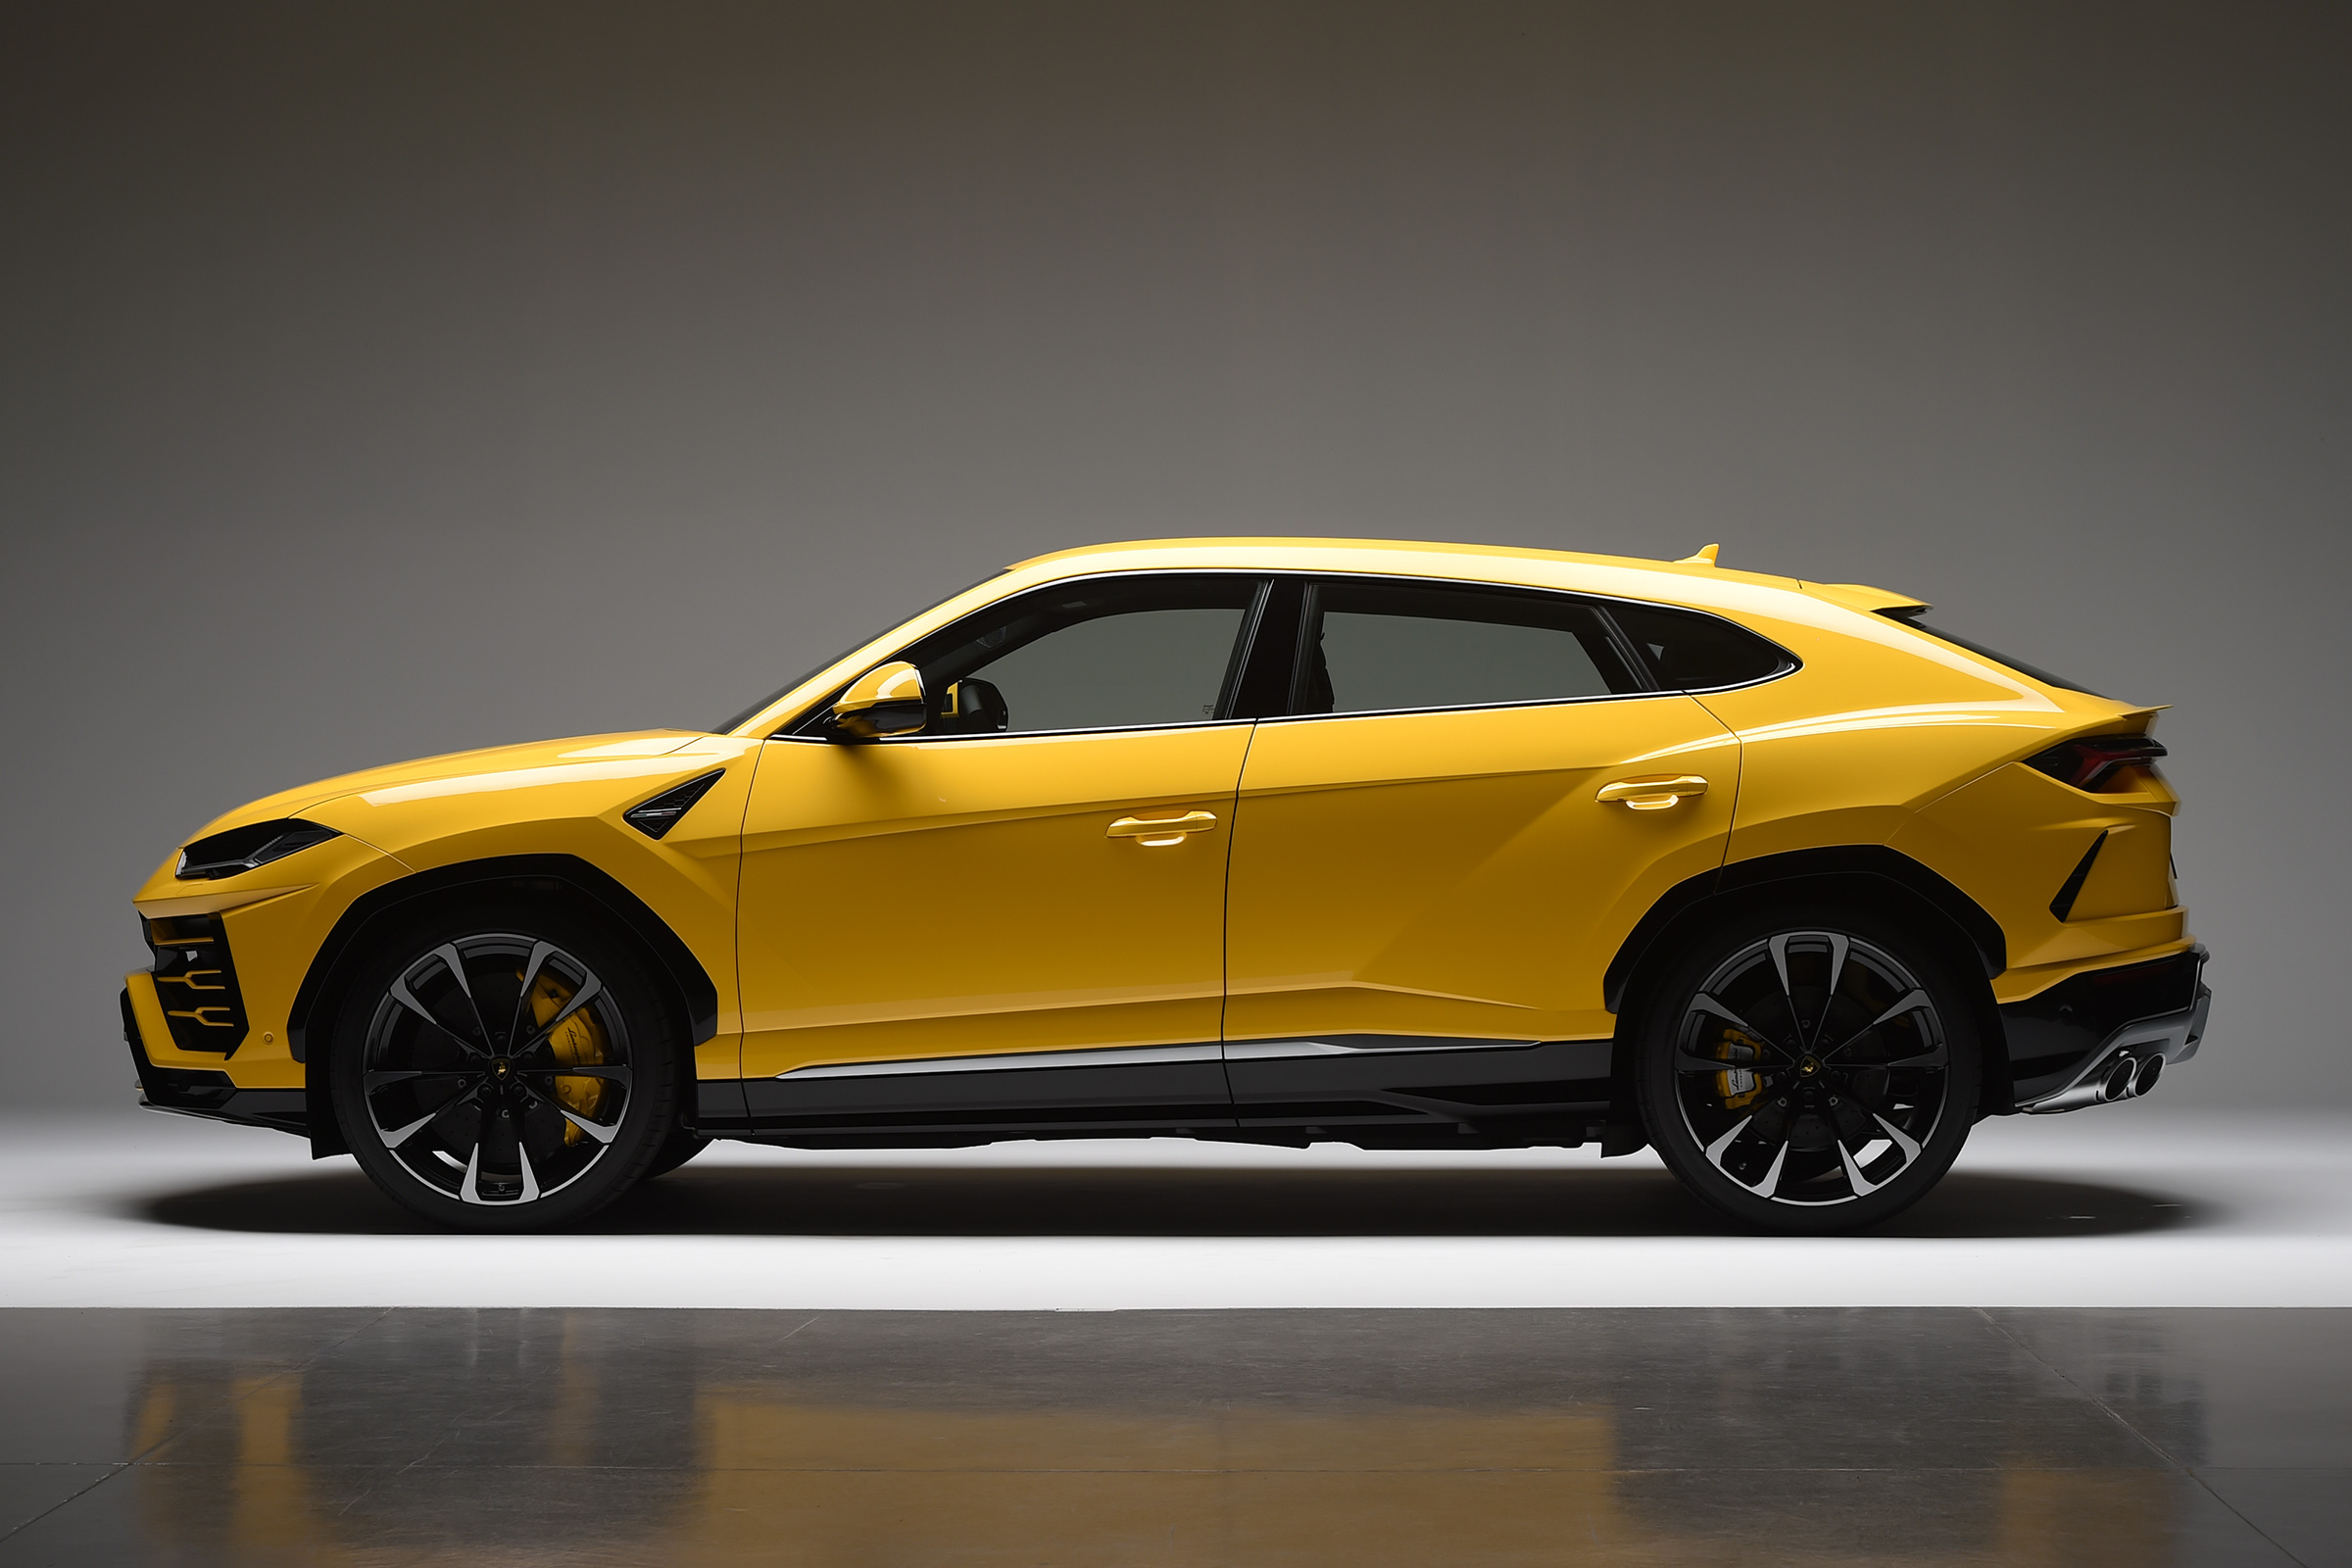 New Lamborghini Urus SUV revealed in full – due in 2018 with 641bhp and ...